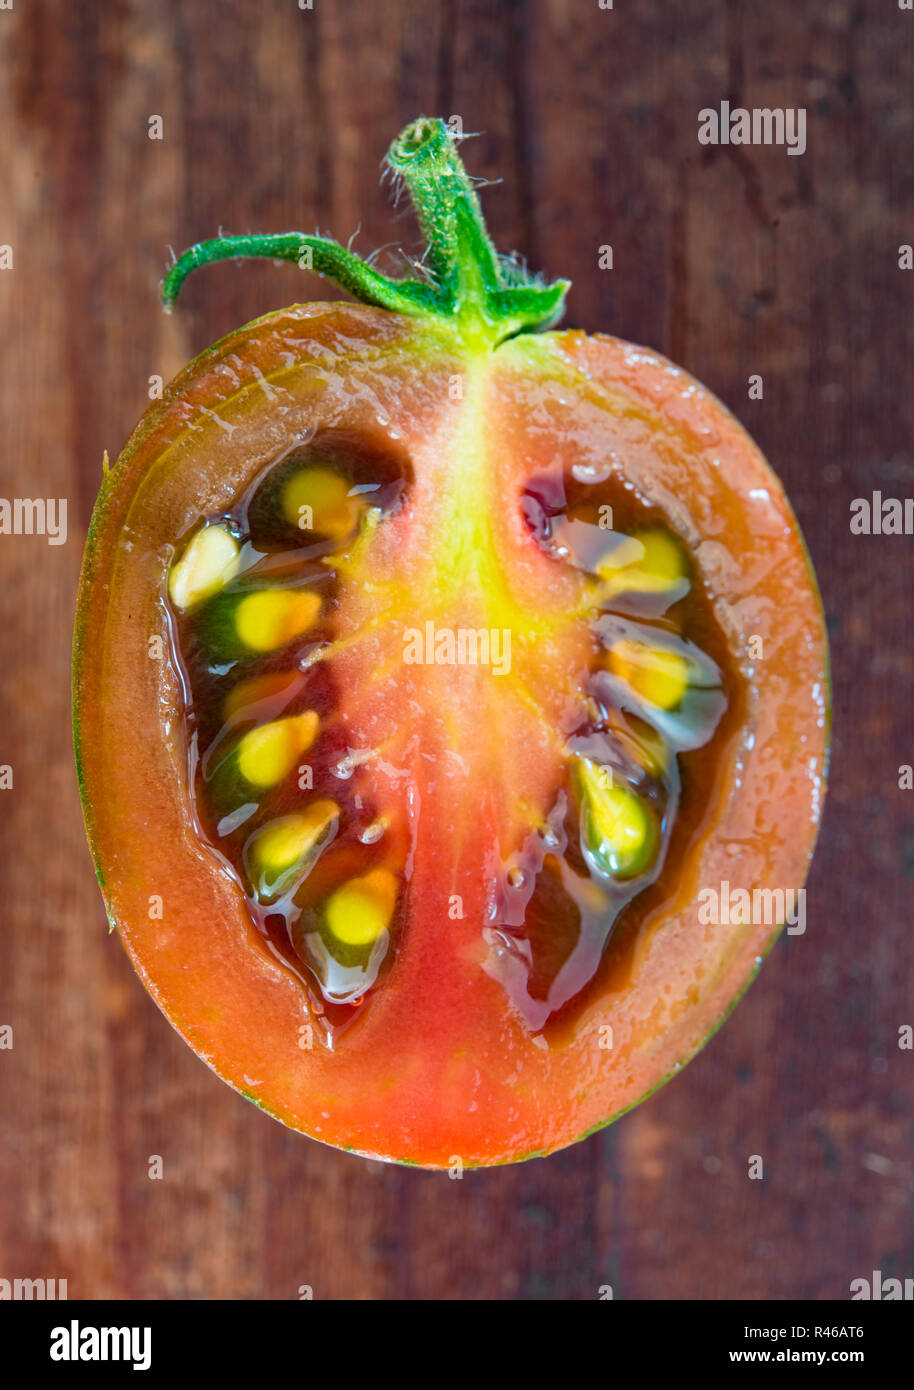 half,red tomato cut open on rustic wooden table Stock Photo